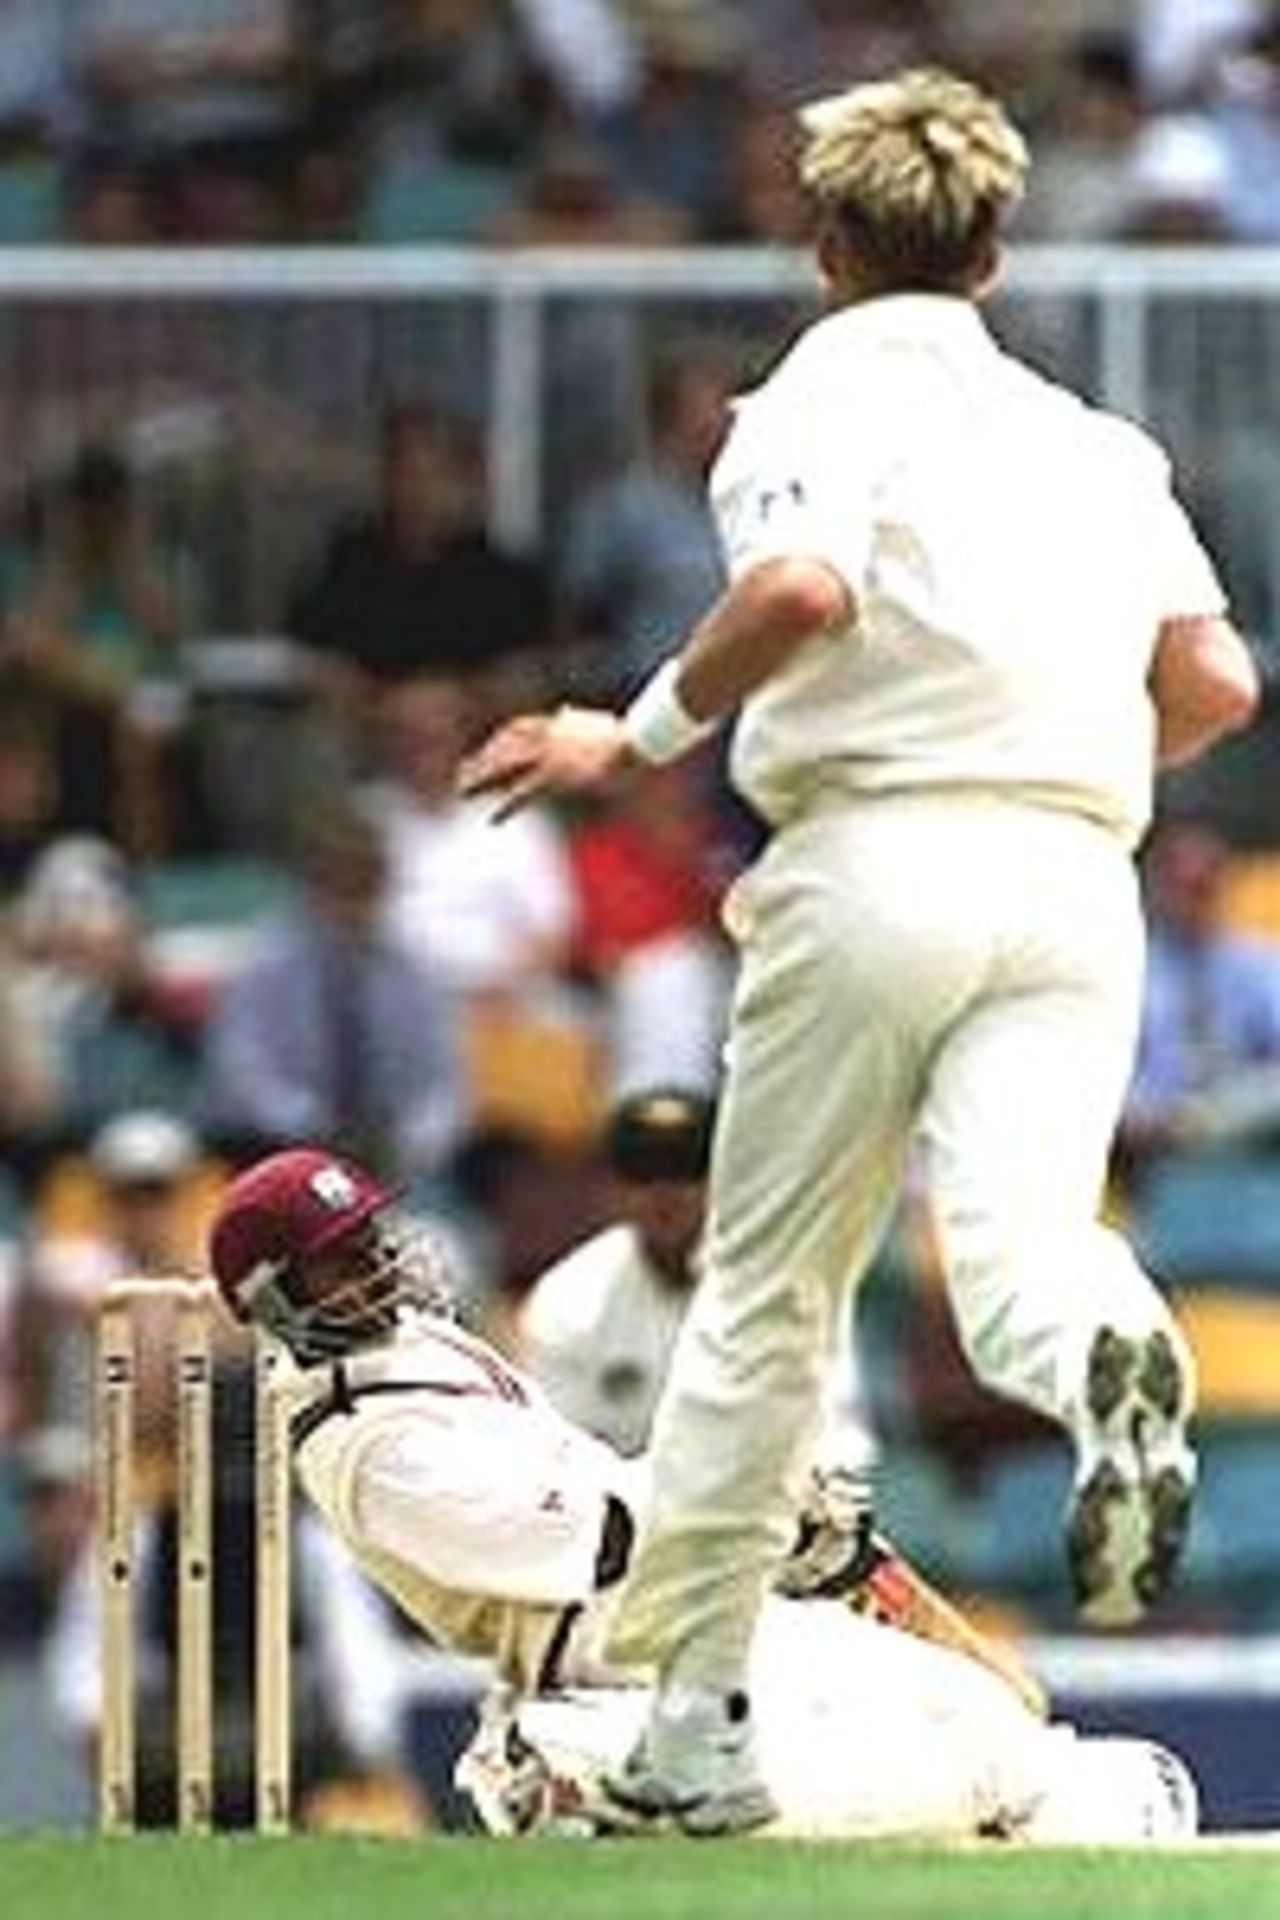 Shivnarine Chanderpaul of the West Indies is felled by a bouncer from Brett Lee of Australia as West Indies collapse to 82 all out during the first days play of the First Test Match between Australia and the West Indies at The Gabba cricket ground, Brisbane, Australia.